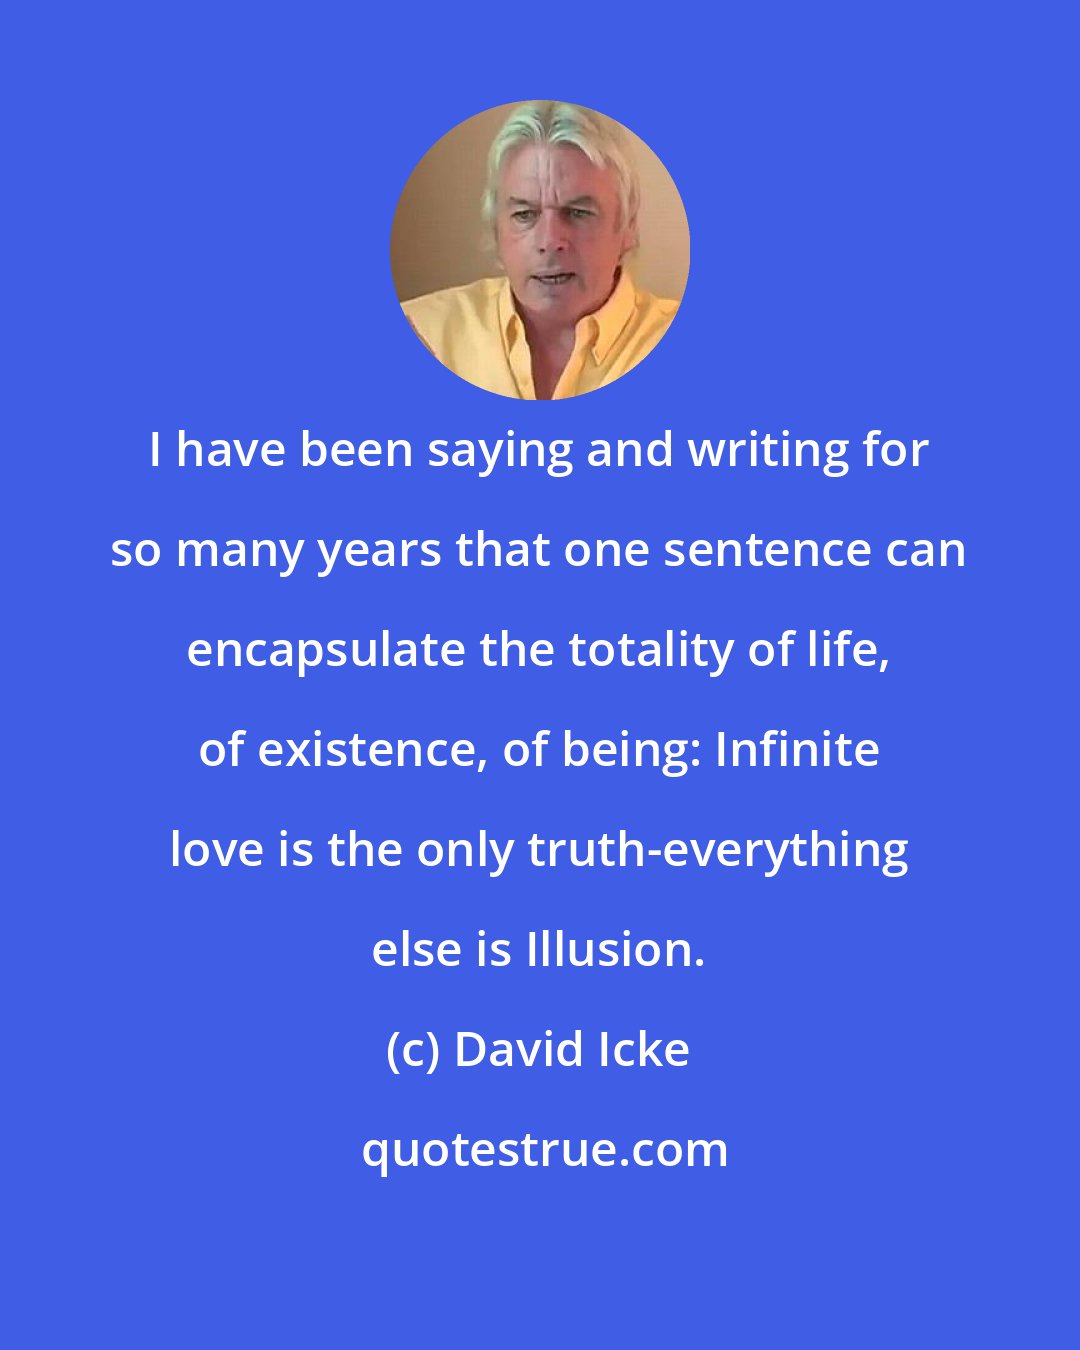 David Icke: I have been saying and writing for so many years that one sentence can encapsulate the totality of life, of existence, of being: Infinite love is the only truth-everything else is Illusion.